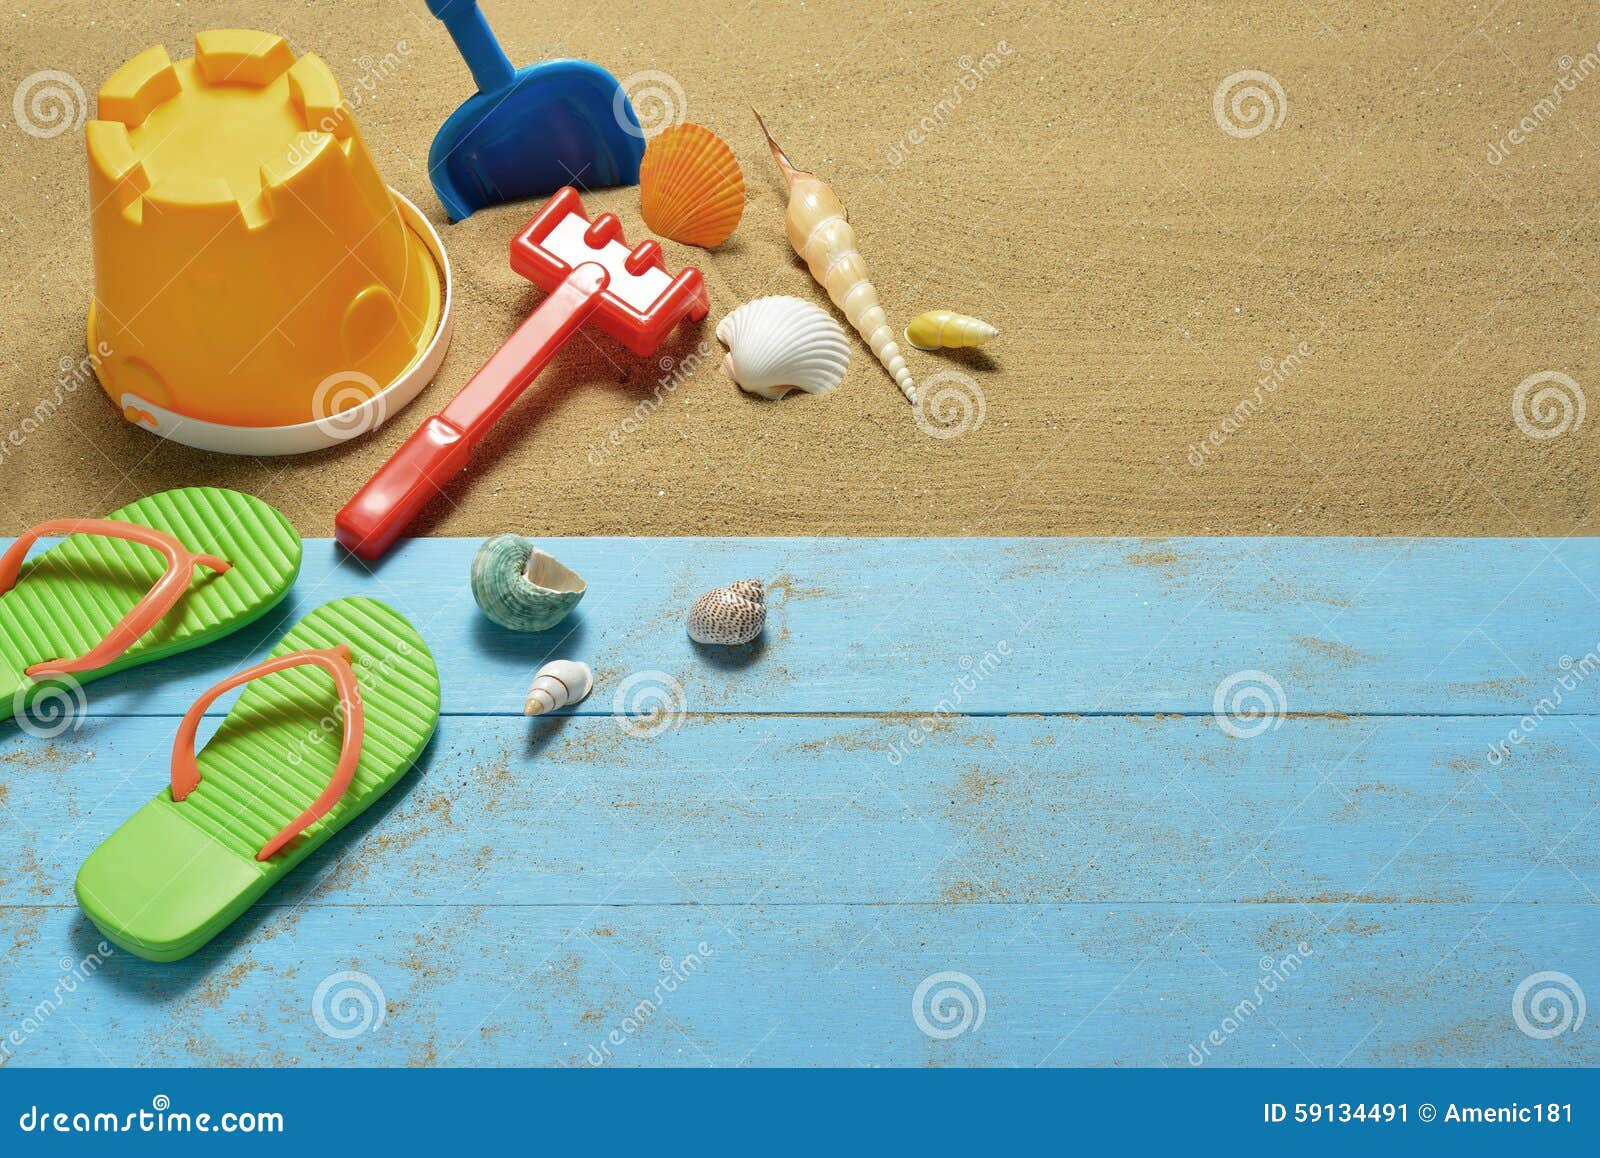 Beach accessories stock image. Image of relax, tourism - 59134491